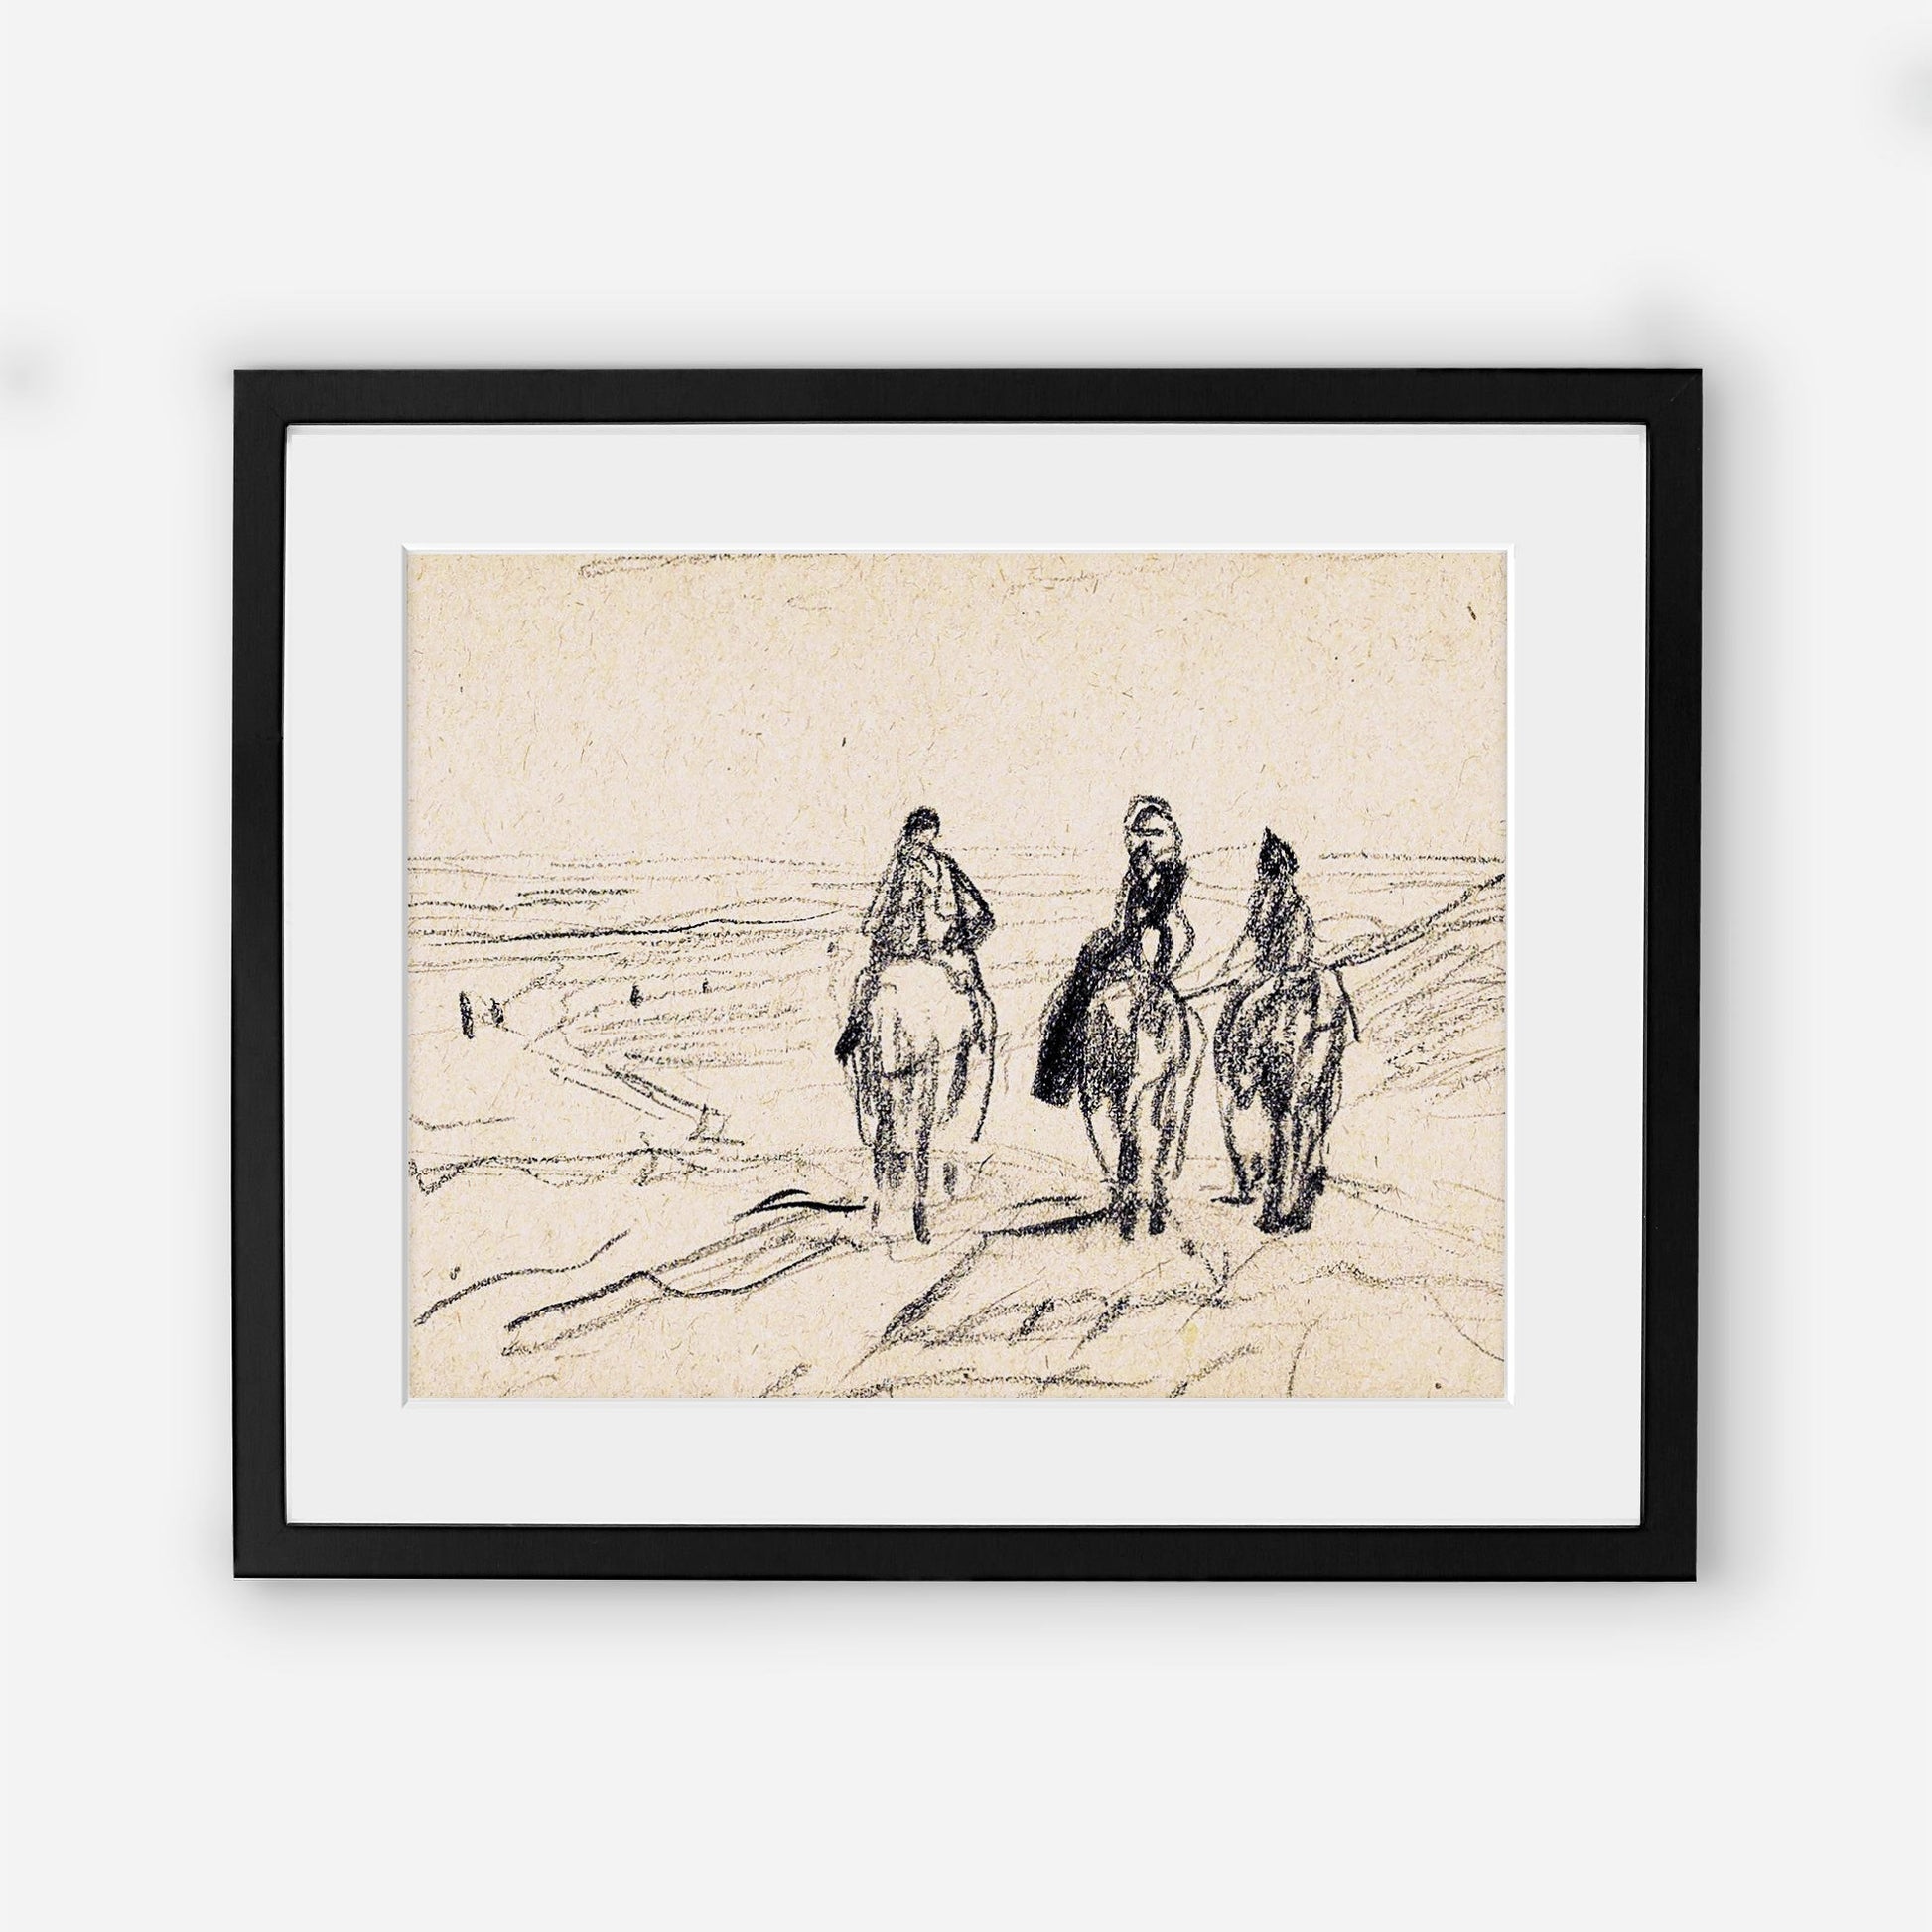 Vintage Horse Sketch Wall Print - Printed and shipped to you on premium paper